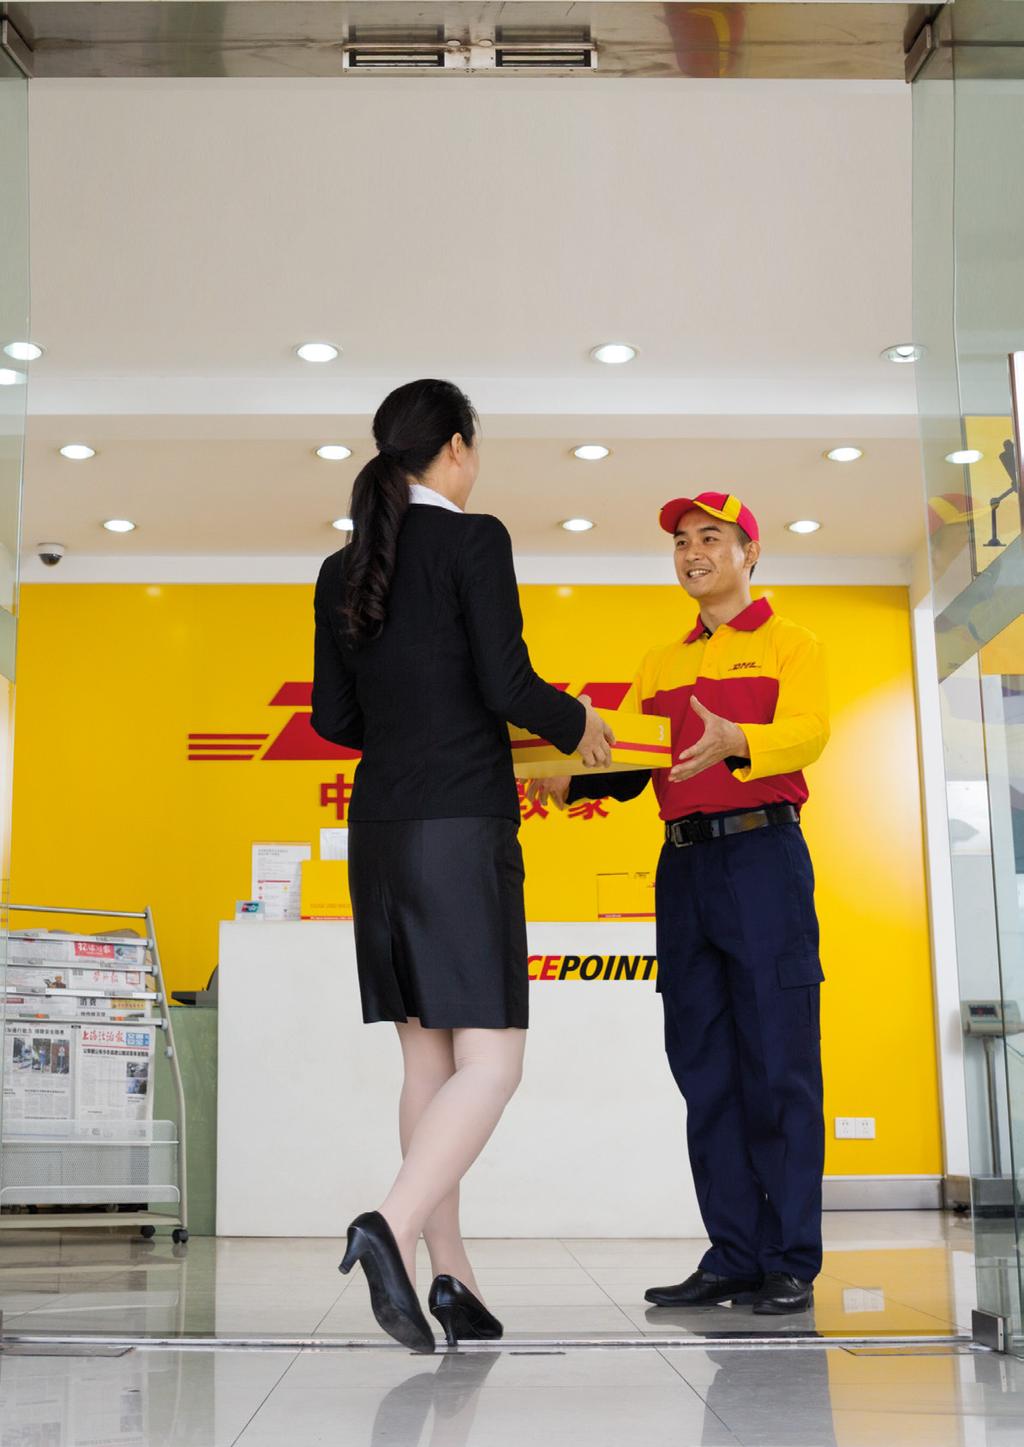 DHL Express Excellence. Simply delivered.